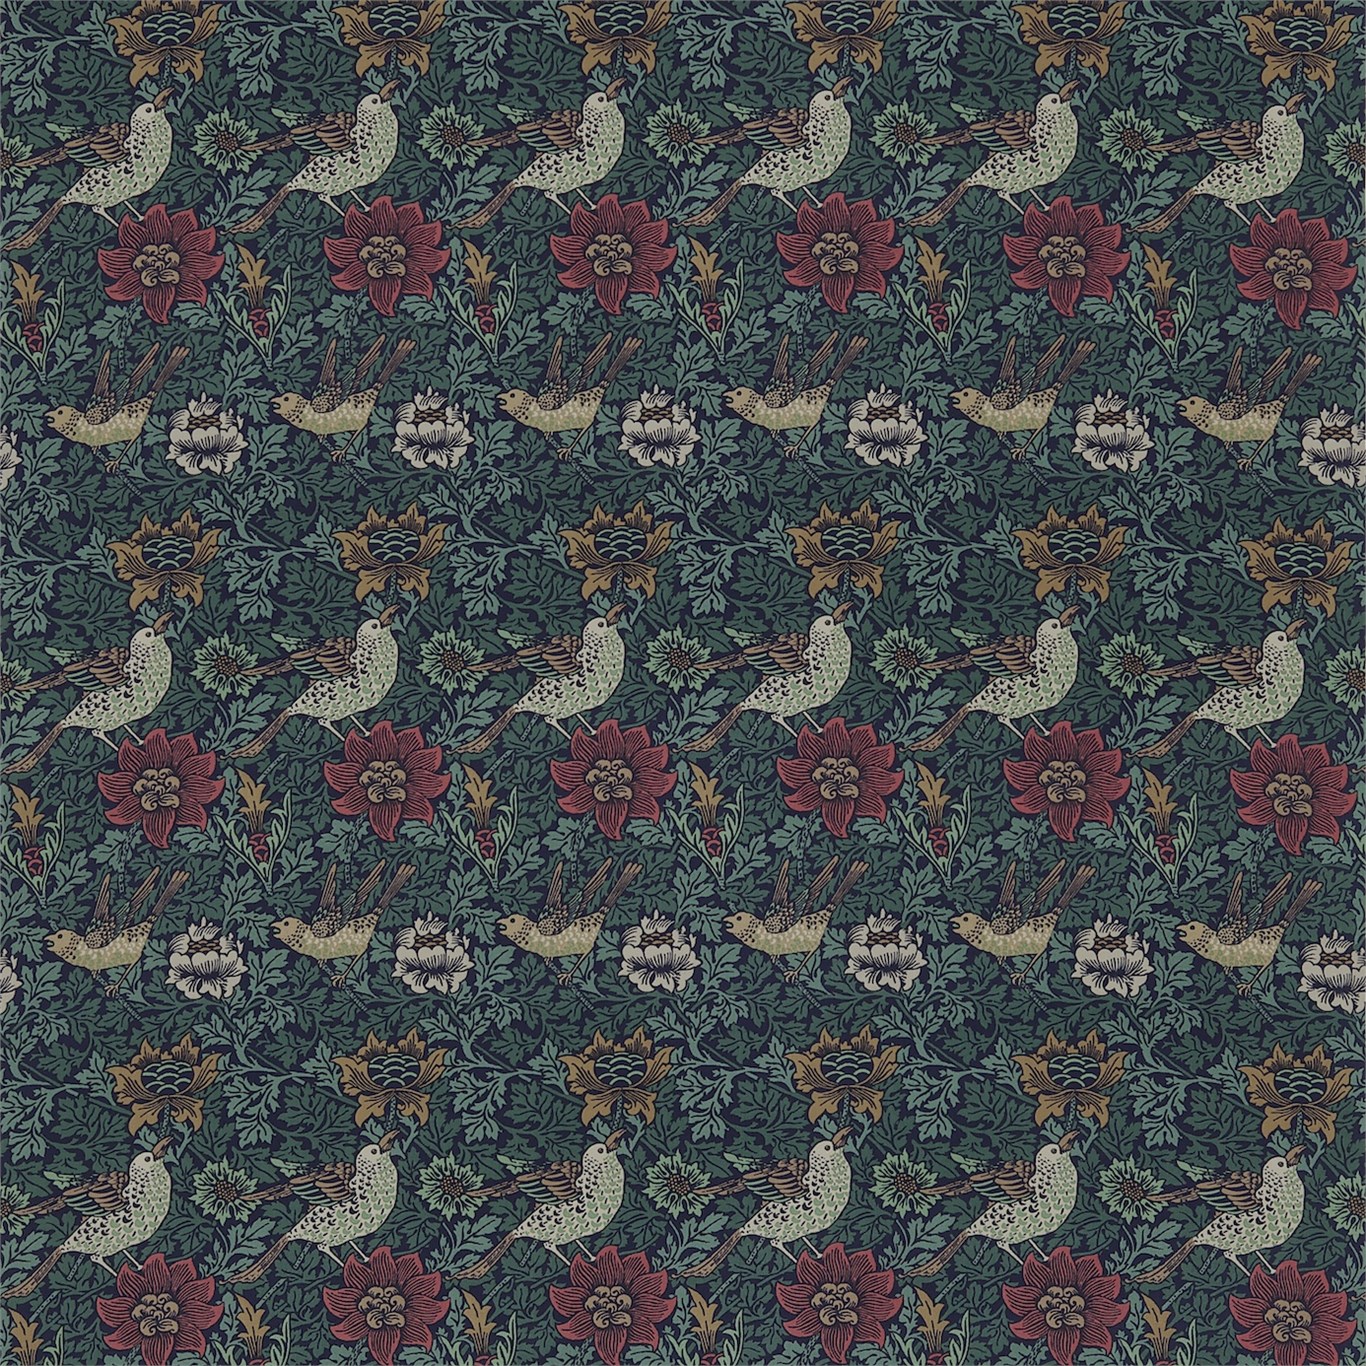 Bird & Anemone, A Fabric By Morris & Co - William Morris Bird And Anemone - HD Wallpaper 